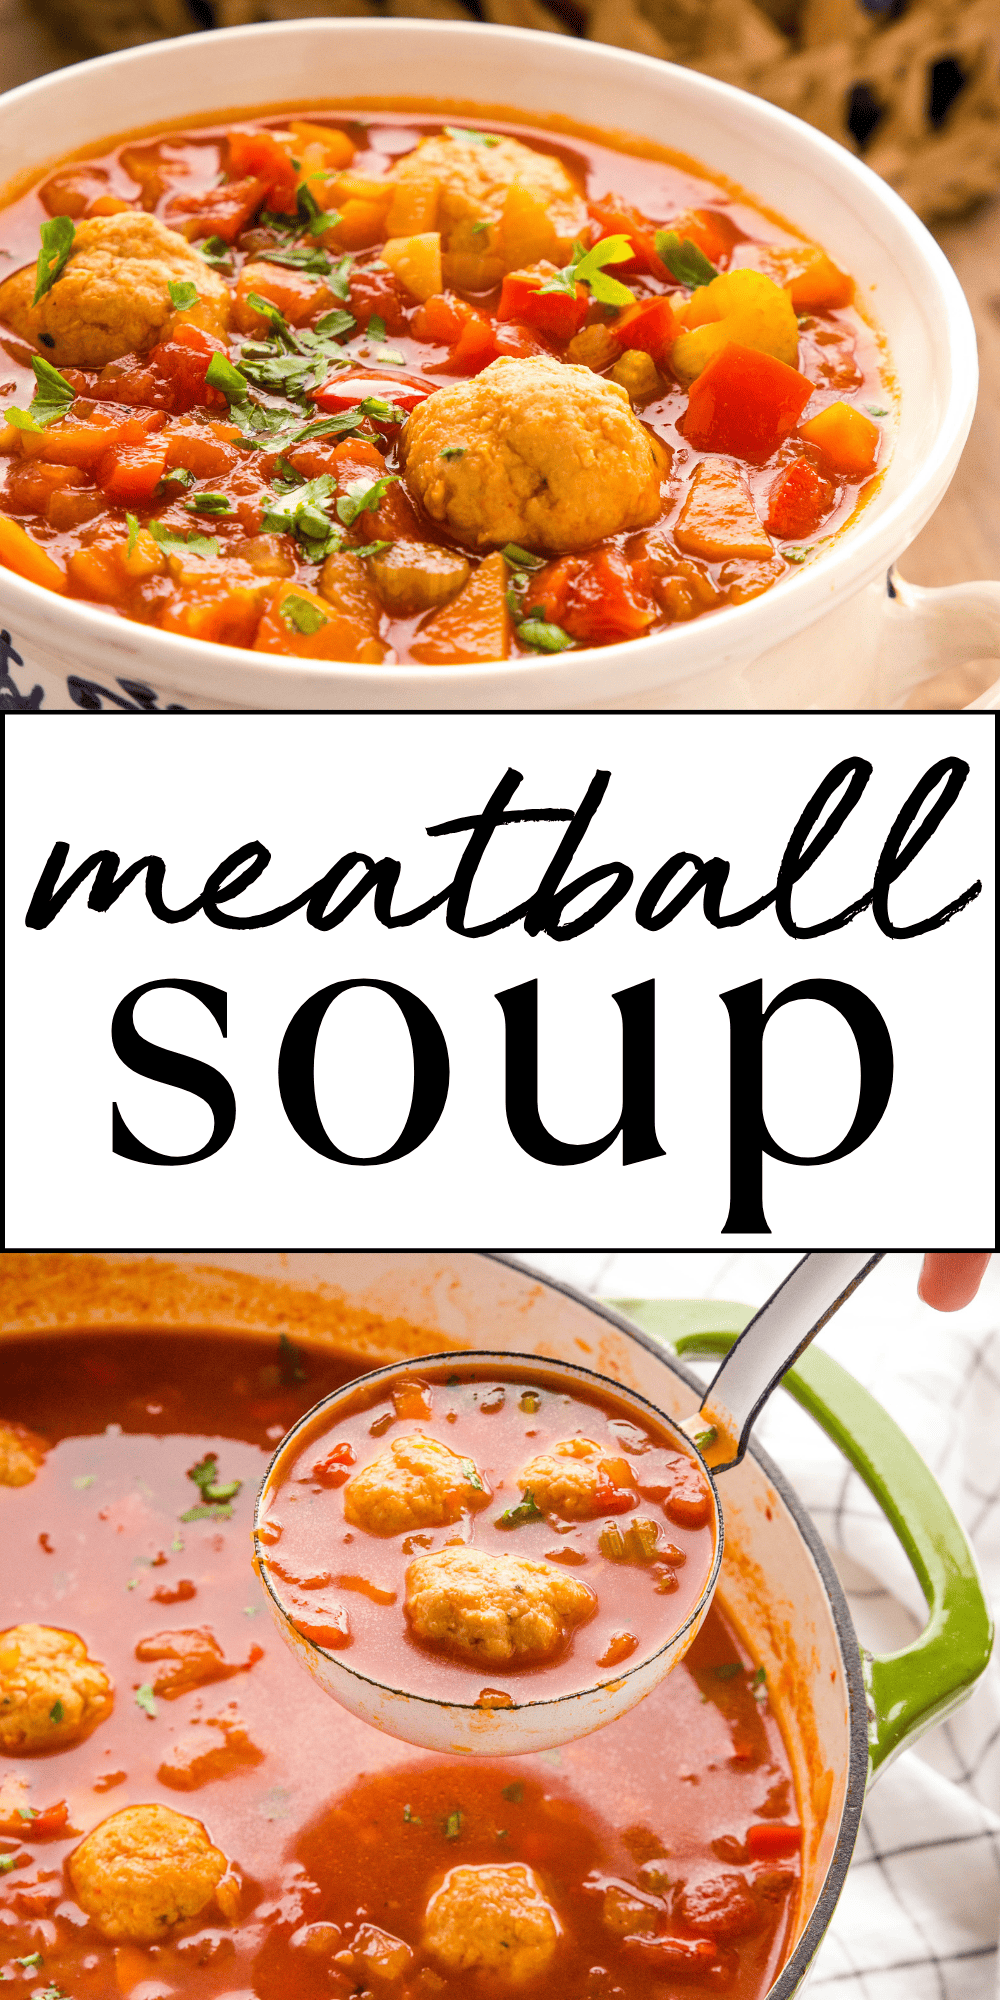 This Meatball Soup recipe (Ciorba de Perisoare) is a classic Romanian soup made with turkey meatballs, vegetables, and a sour broth. It's a hearty and delicious turkey meatball soup that's best served with a loaf of crusty bread. Recipe from thebusybaker.ca! #ciorbadeperisoare #meatballsoup #healthymeatballsoup #easymeatballsoup #meatballsouprecipe #meatballs #soup #souprecipe #easymeal #dinner via @busybakerblog